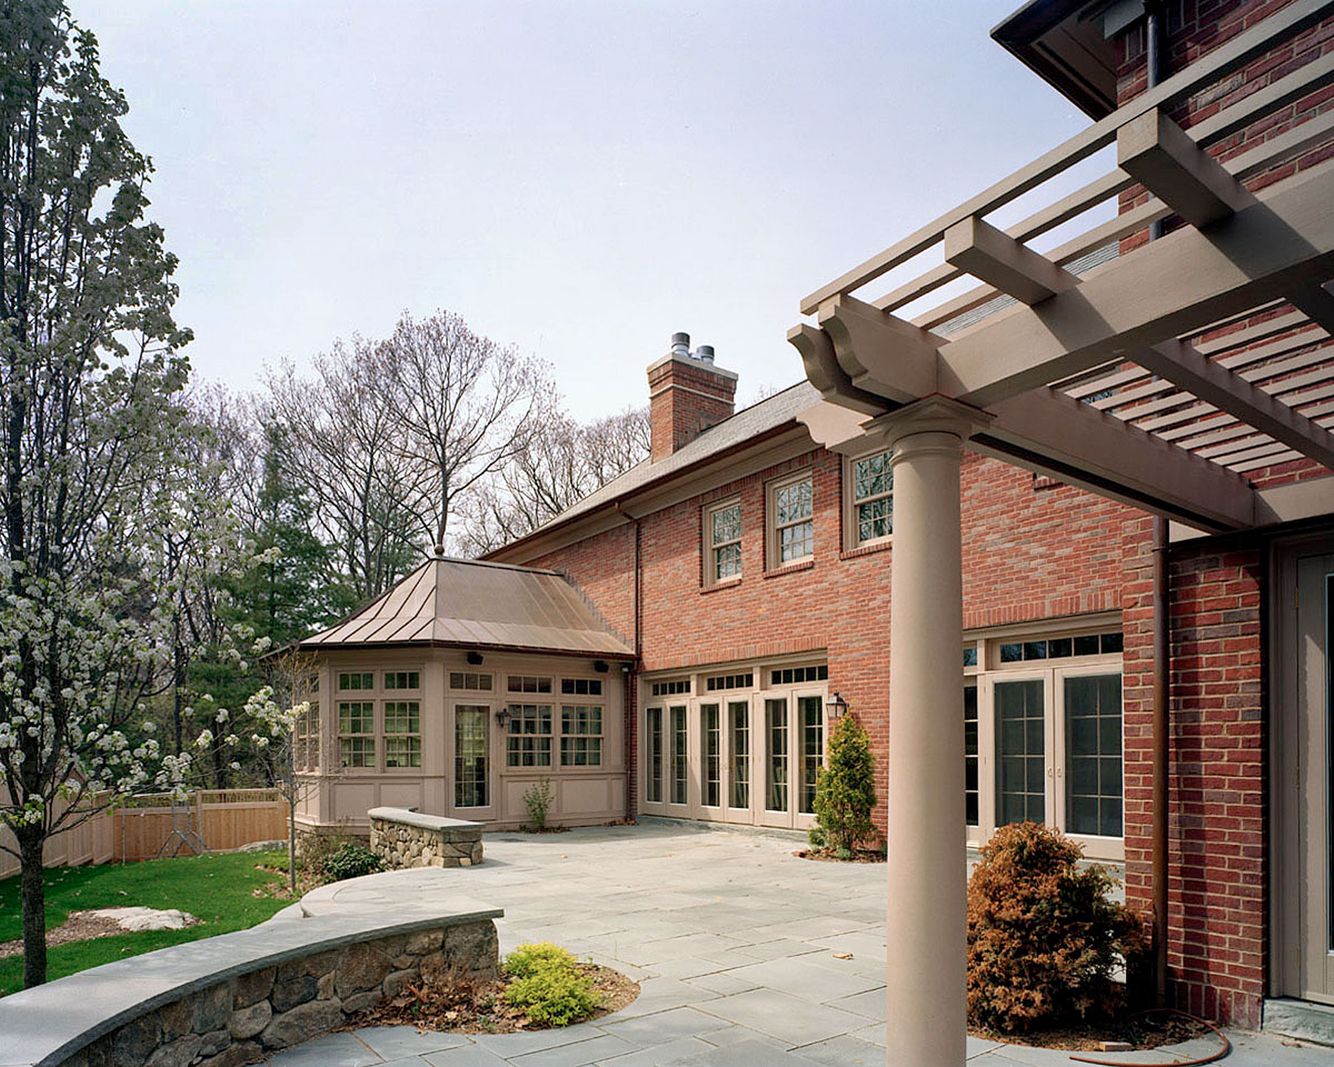 Residential House in Wellesley, MA.